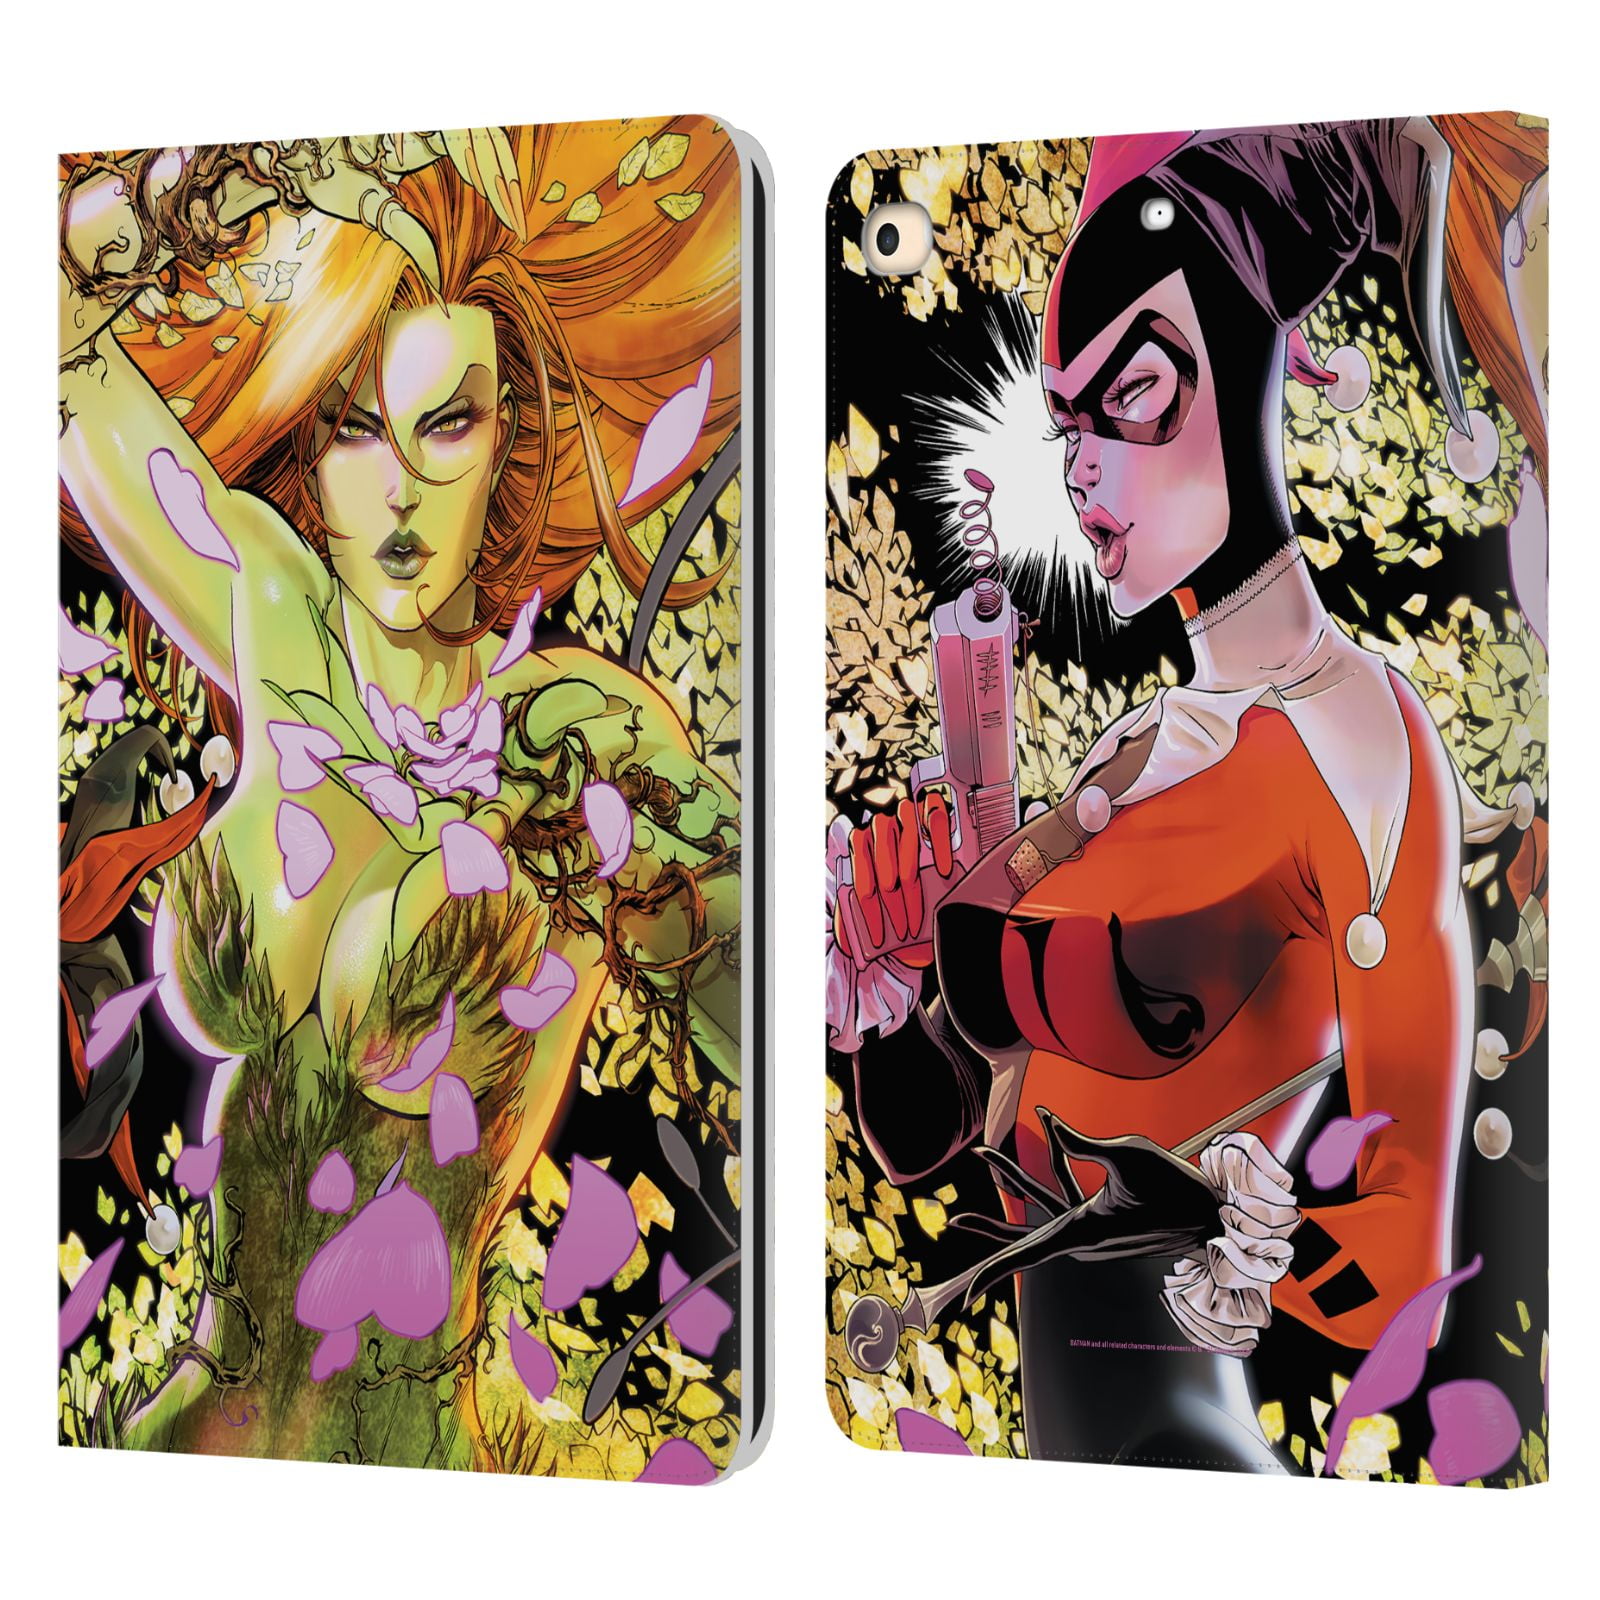 Head Case Designs Officially Licensed Batman DC Comics Gotham City Sirens  Poison Ivy Leather Book Wallet Case Cover Compatible with Apple iPad   2017 / iPad  2018 